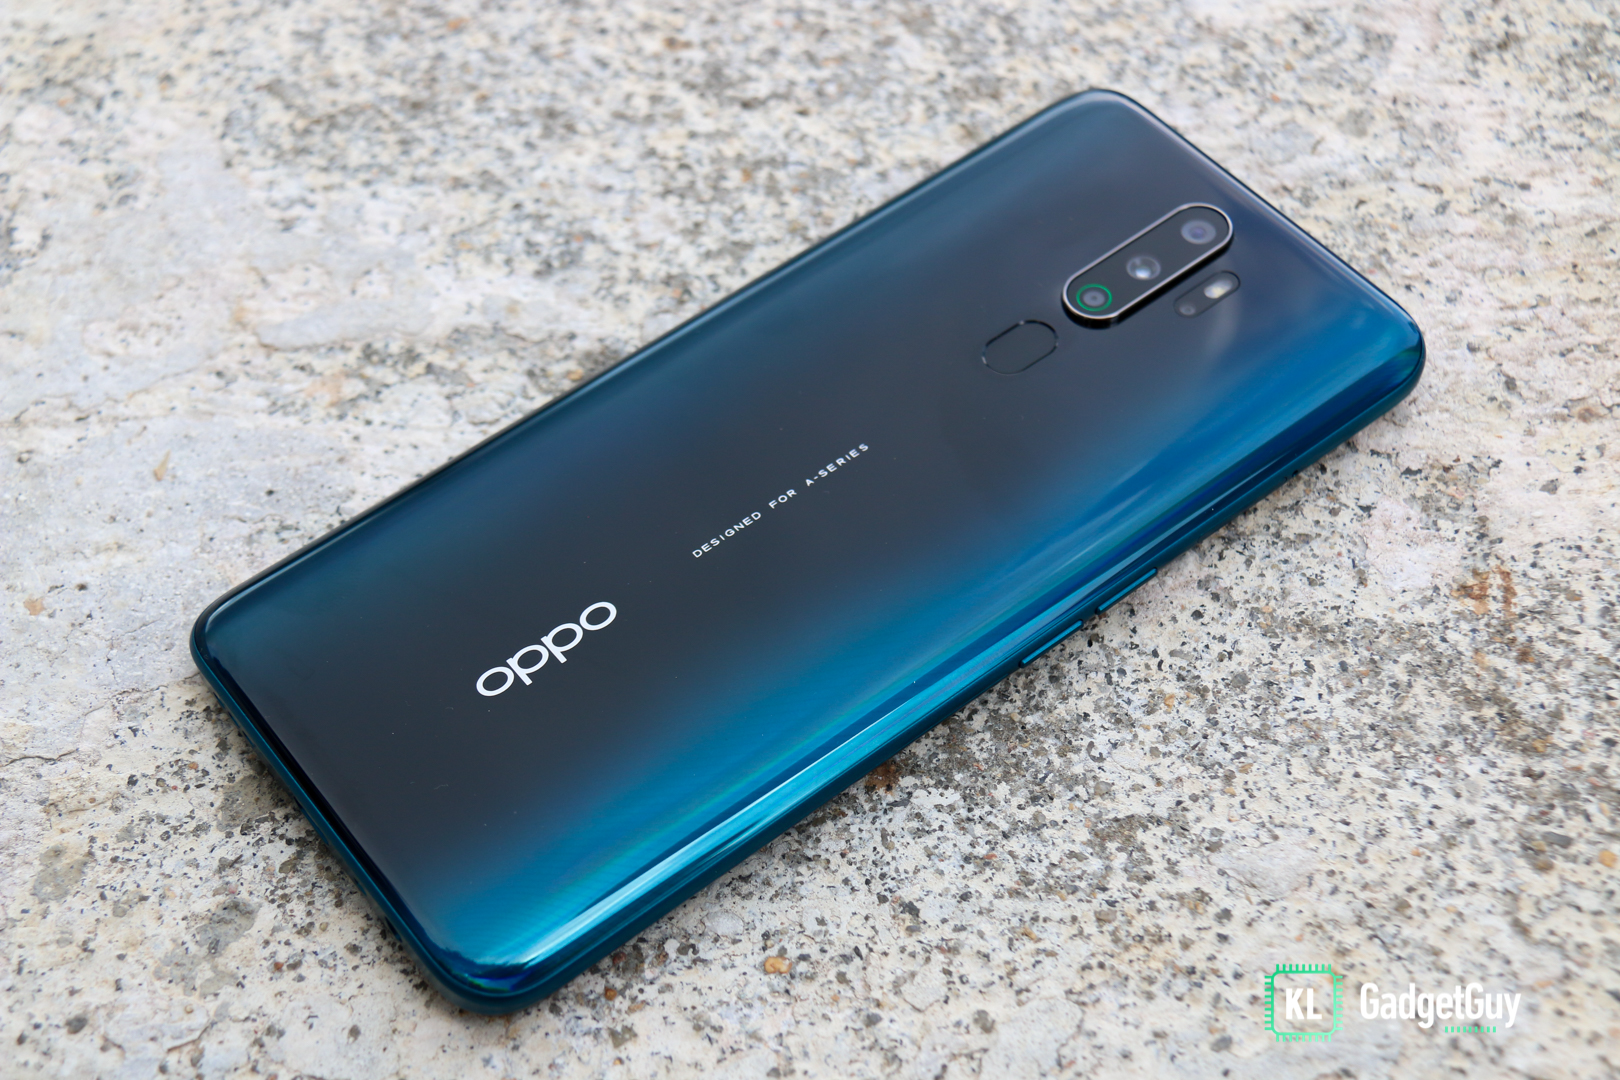 ongeduldig Productief Partina City OPPO A9 2020 Review: More than just a quad camera phone - KLGadgetGuy